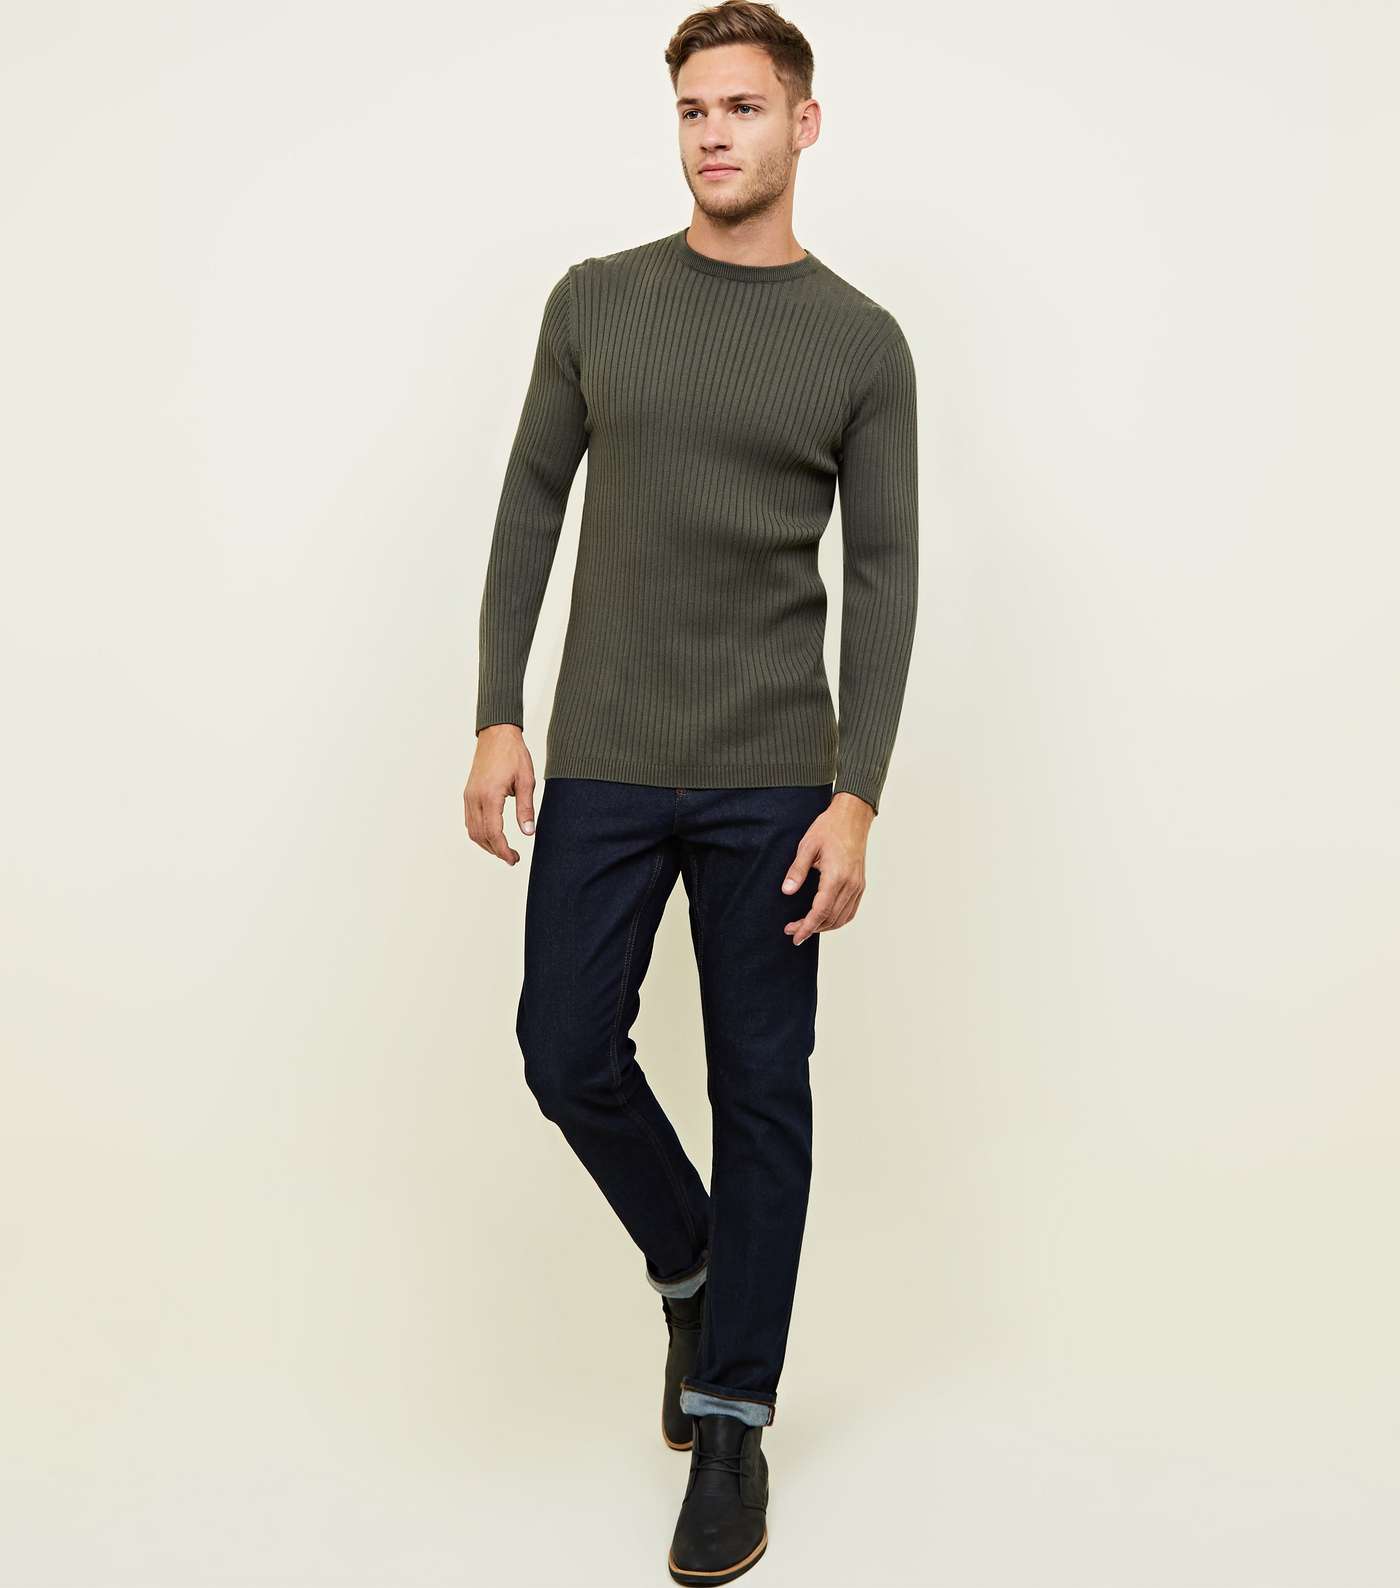 Khaki Ribbed Muscle Fit Jumper Image 2